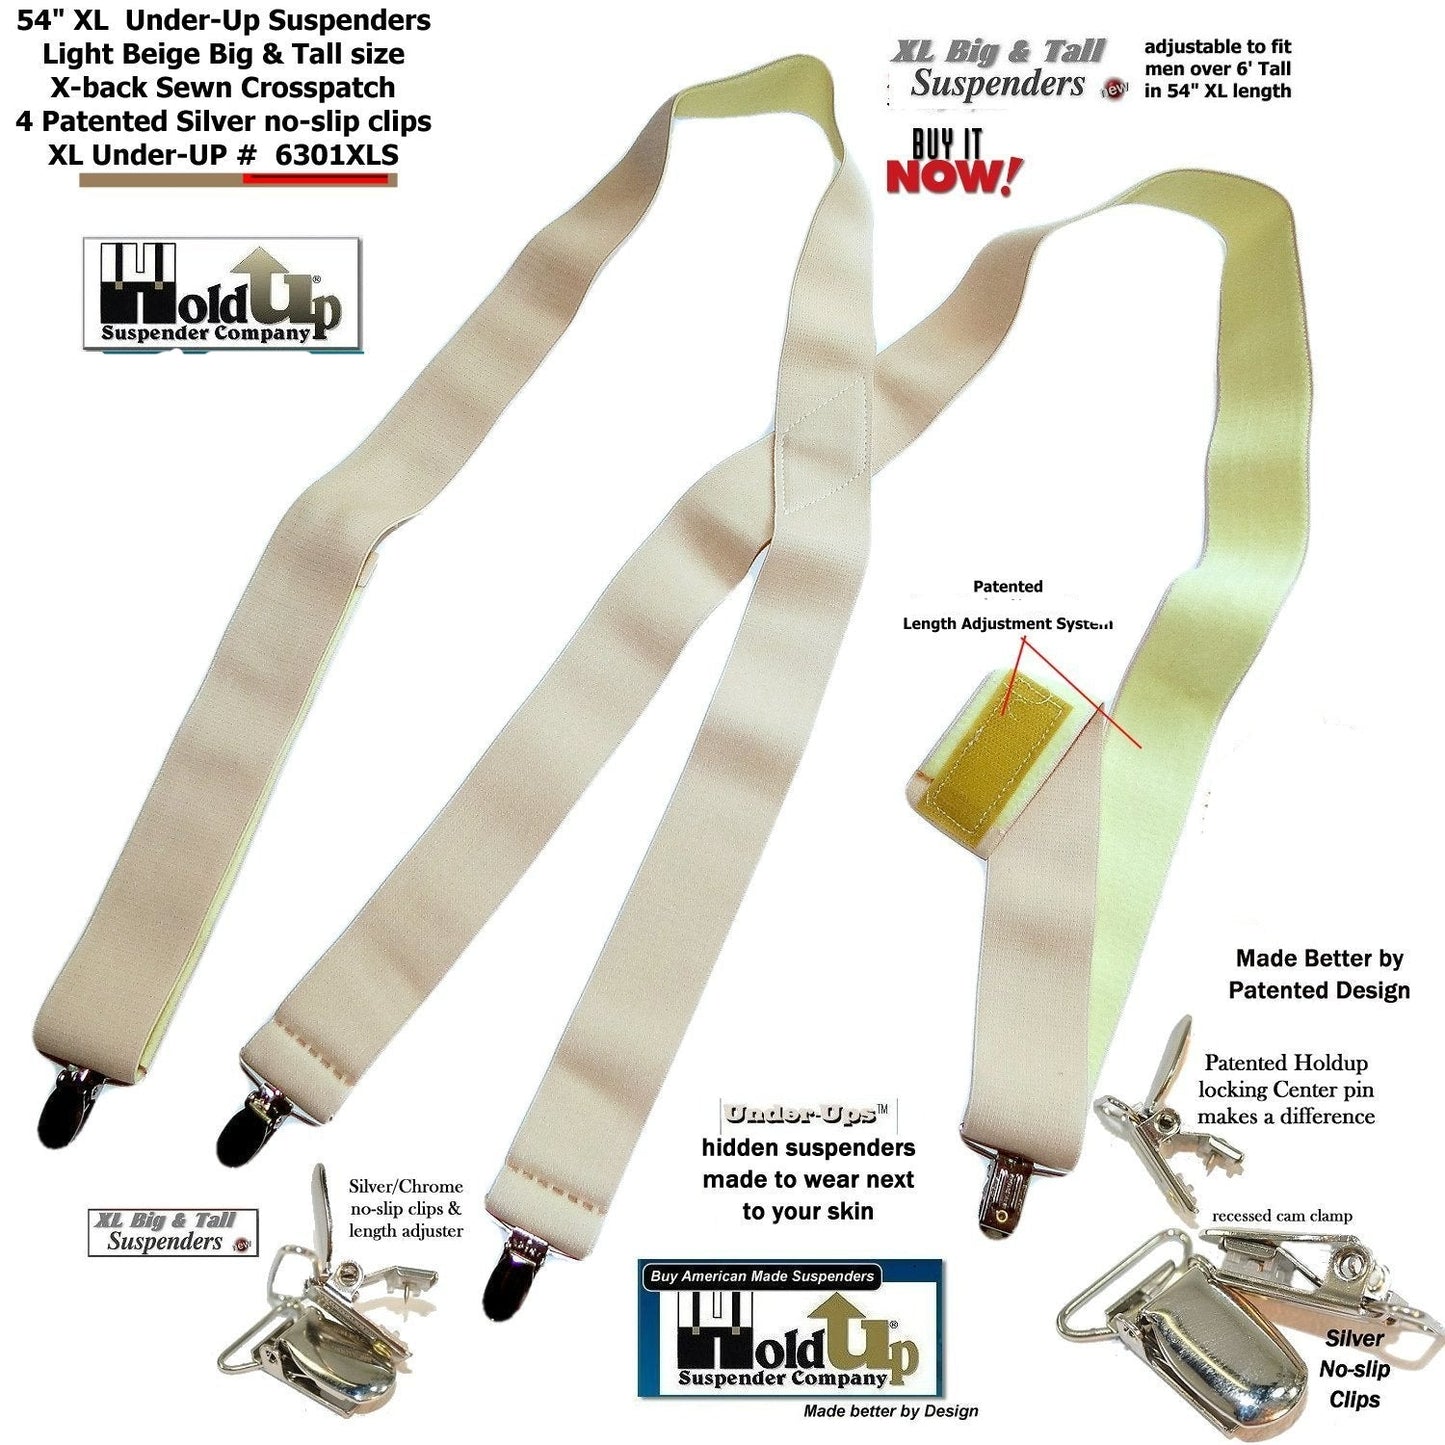 Beige Invisible Undergarment Suspenders 1 1/2" Wide XL in X-back Style w/ No-slip Metal Clips